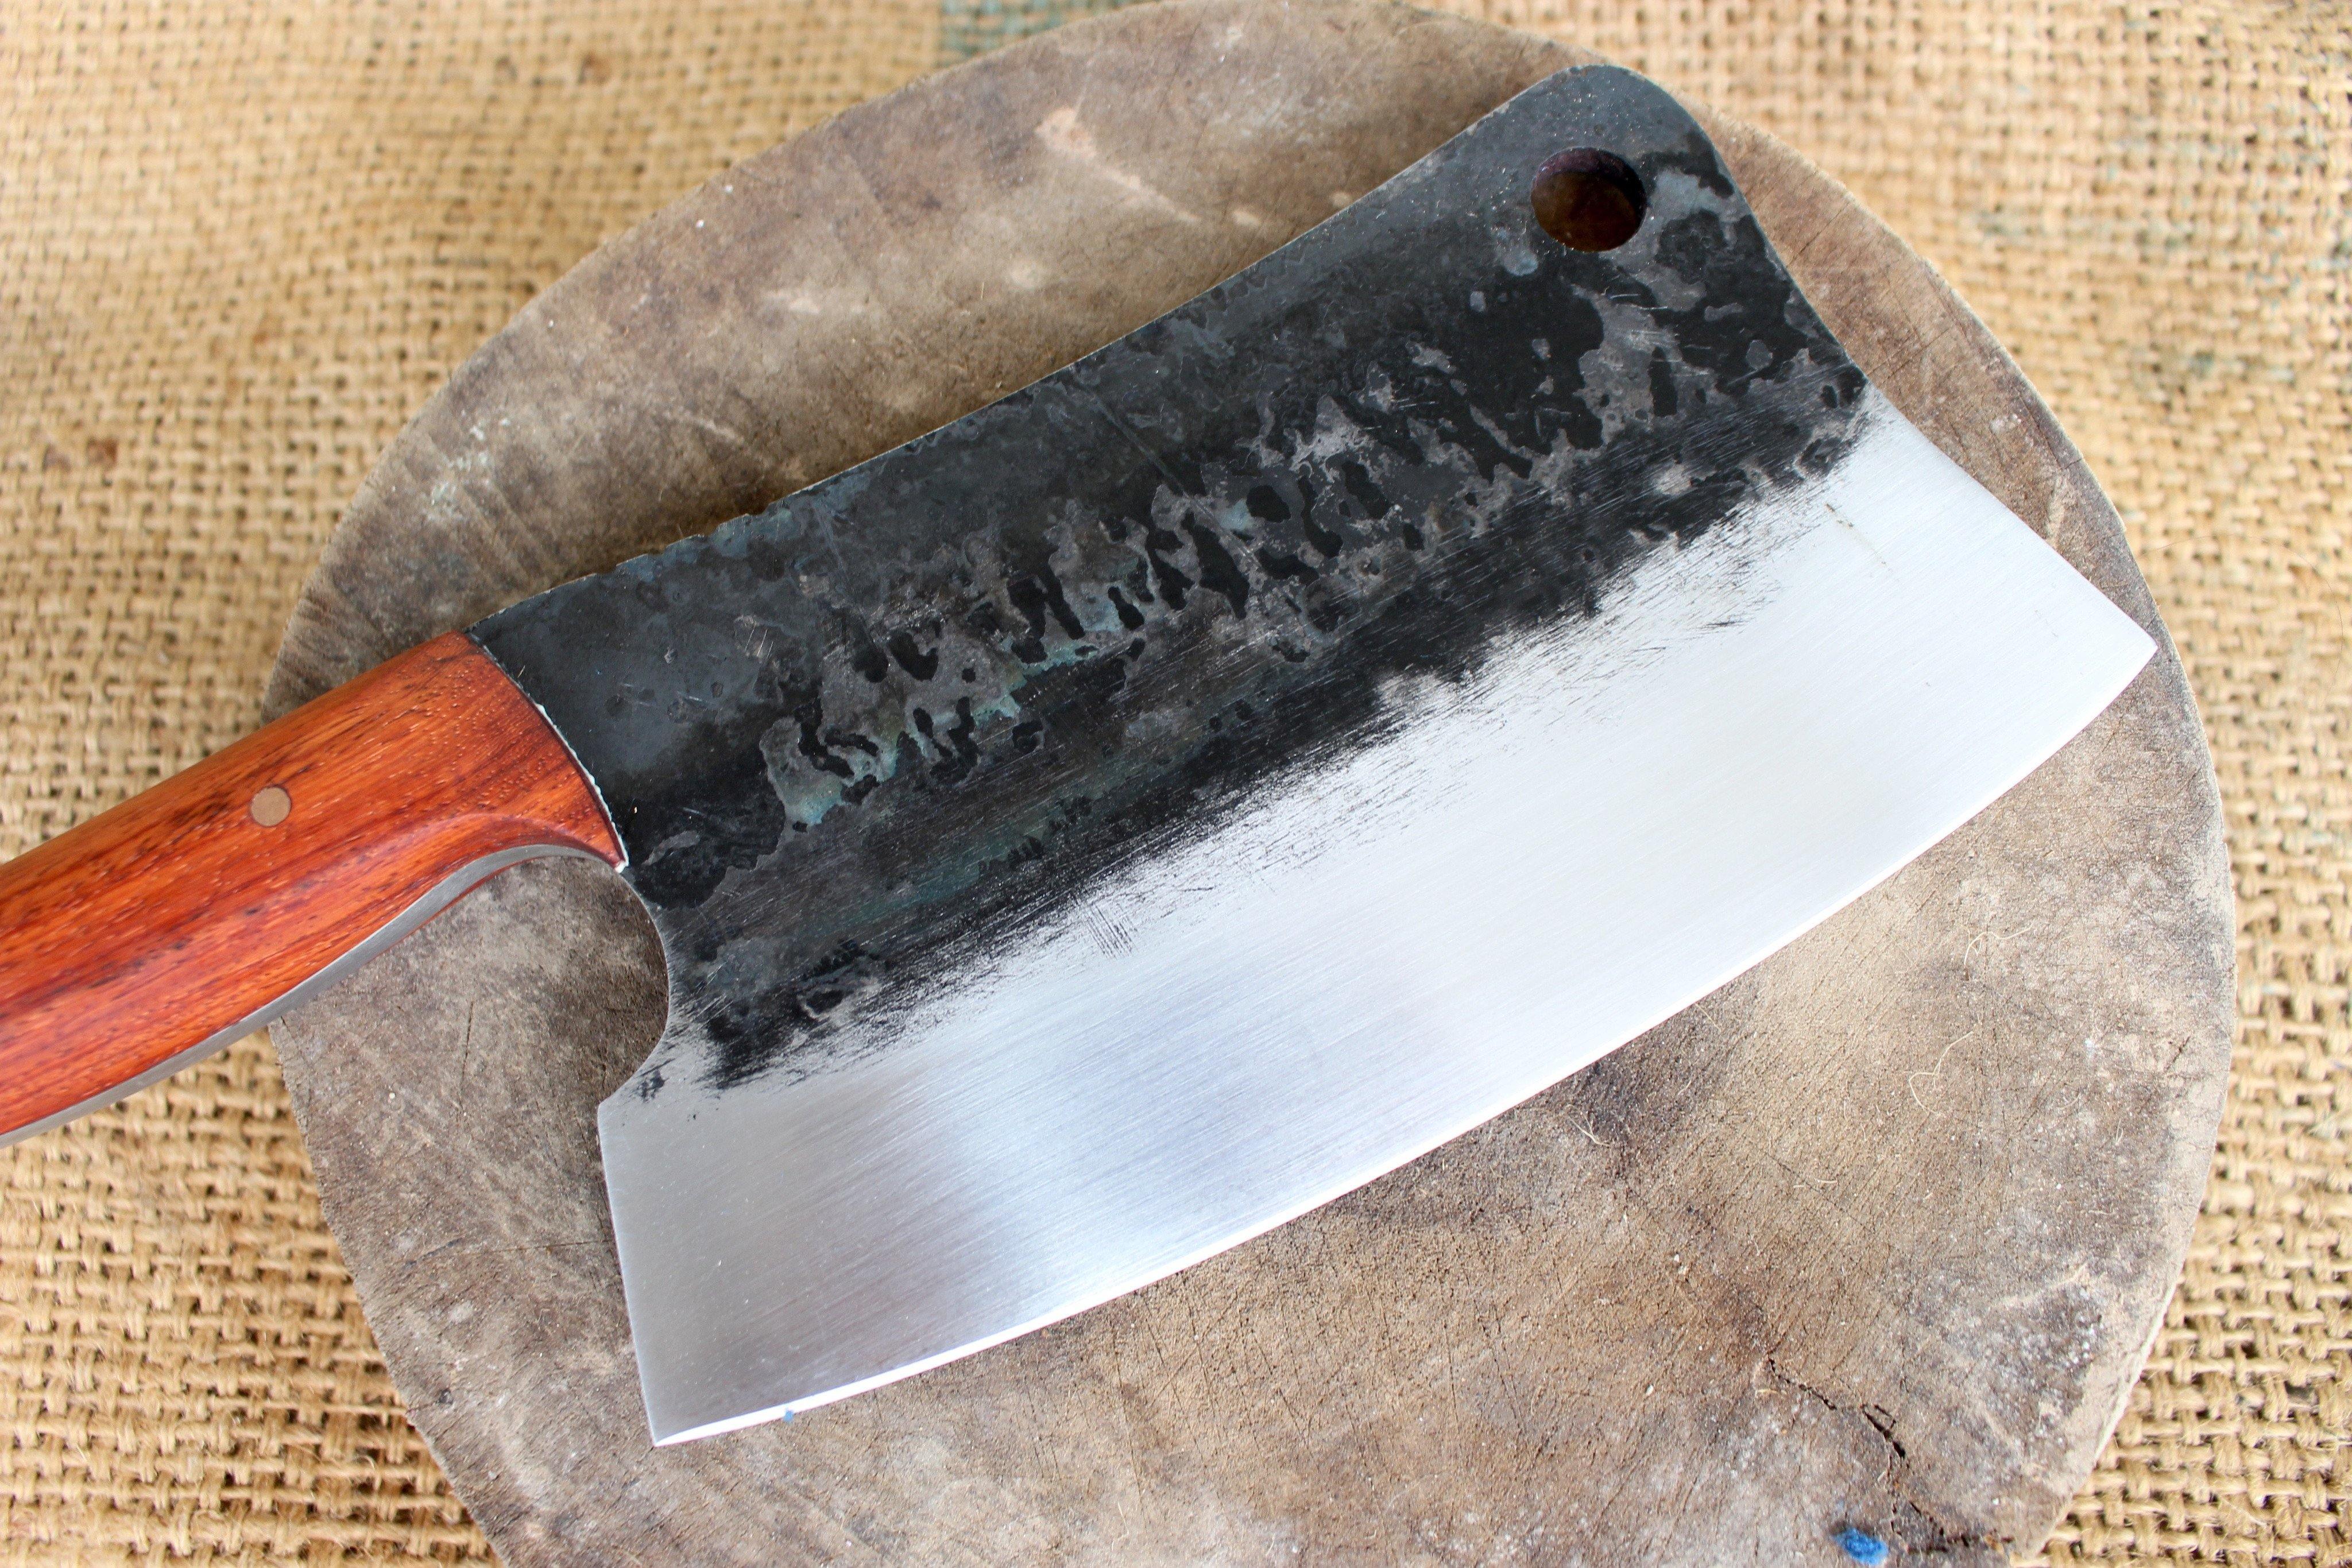 Meat Cleaver - Chef Knife  Hand Forged Knives and Handmade